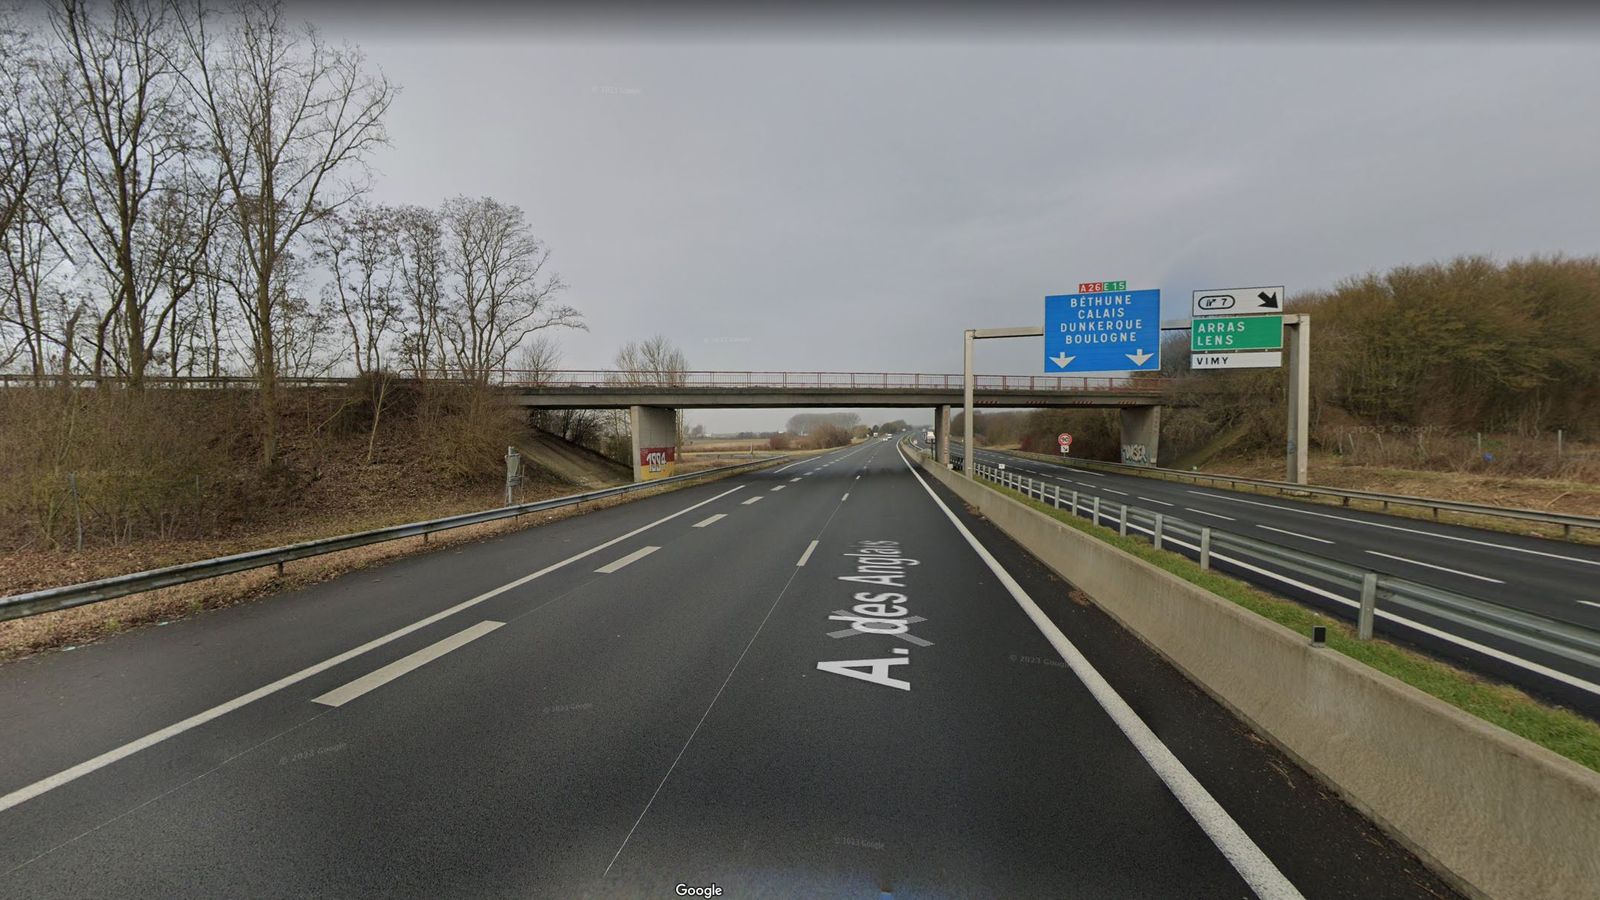 British mother-of-10 among three killed in motorway crash in France - reports